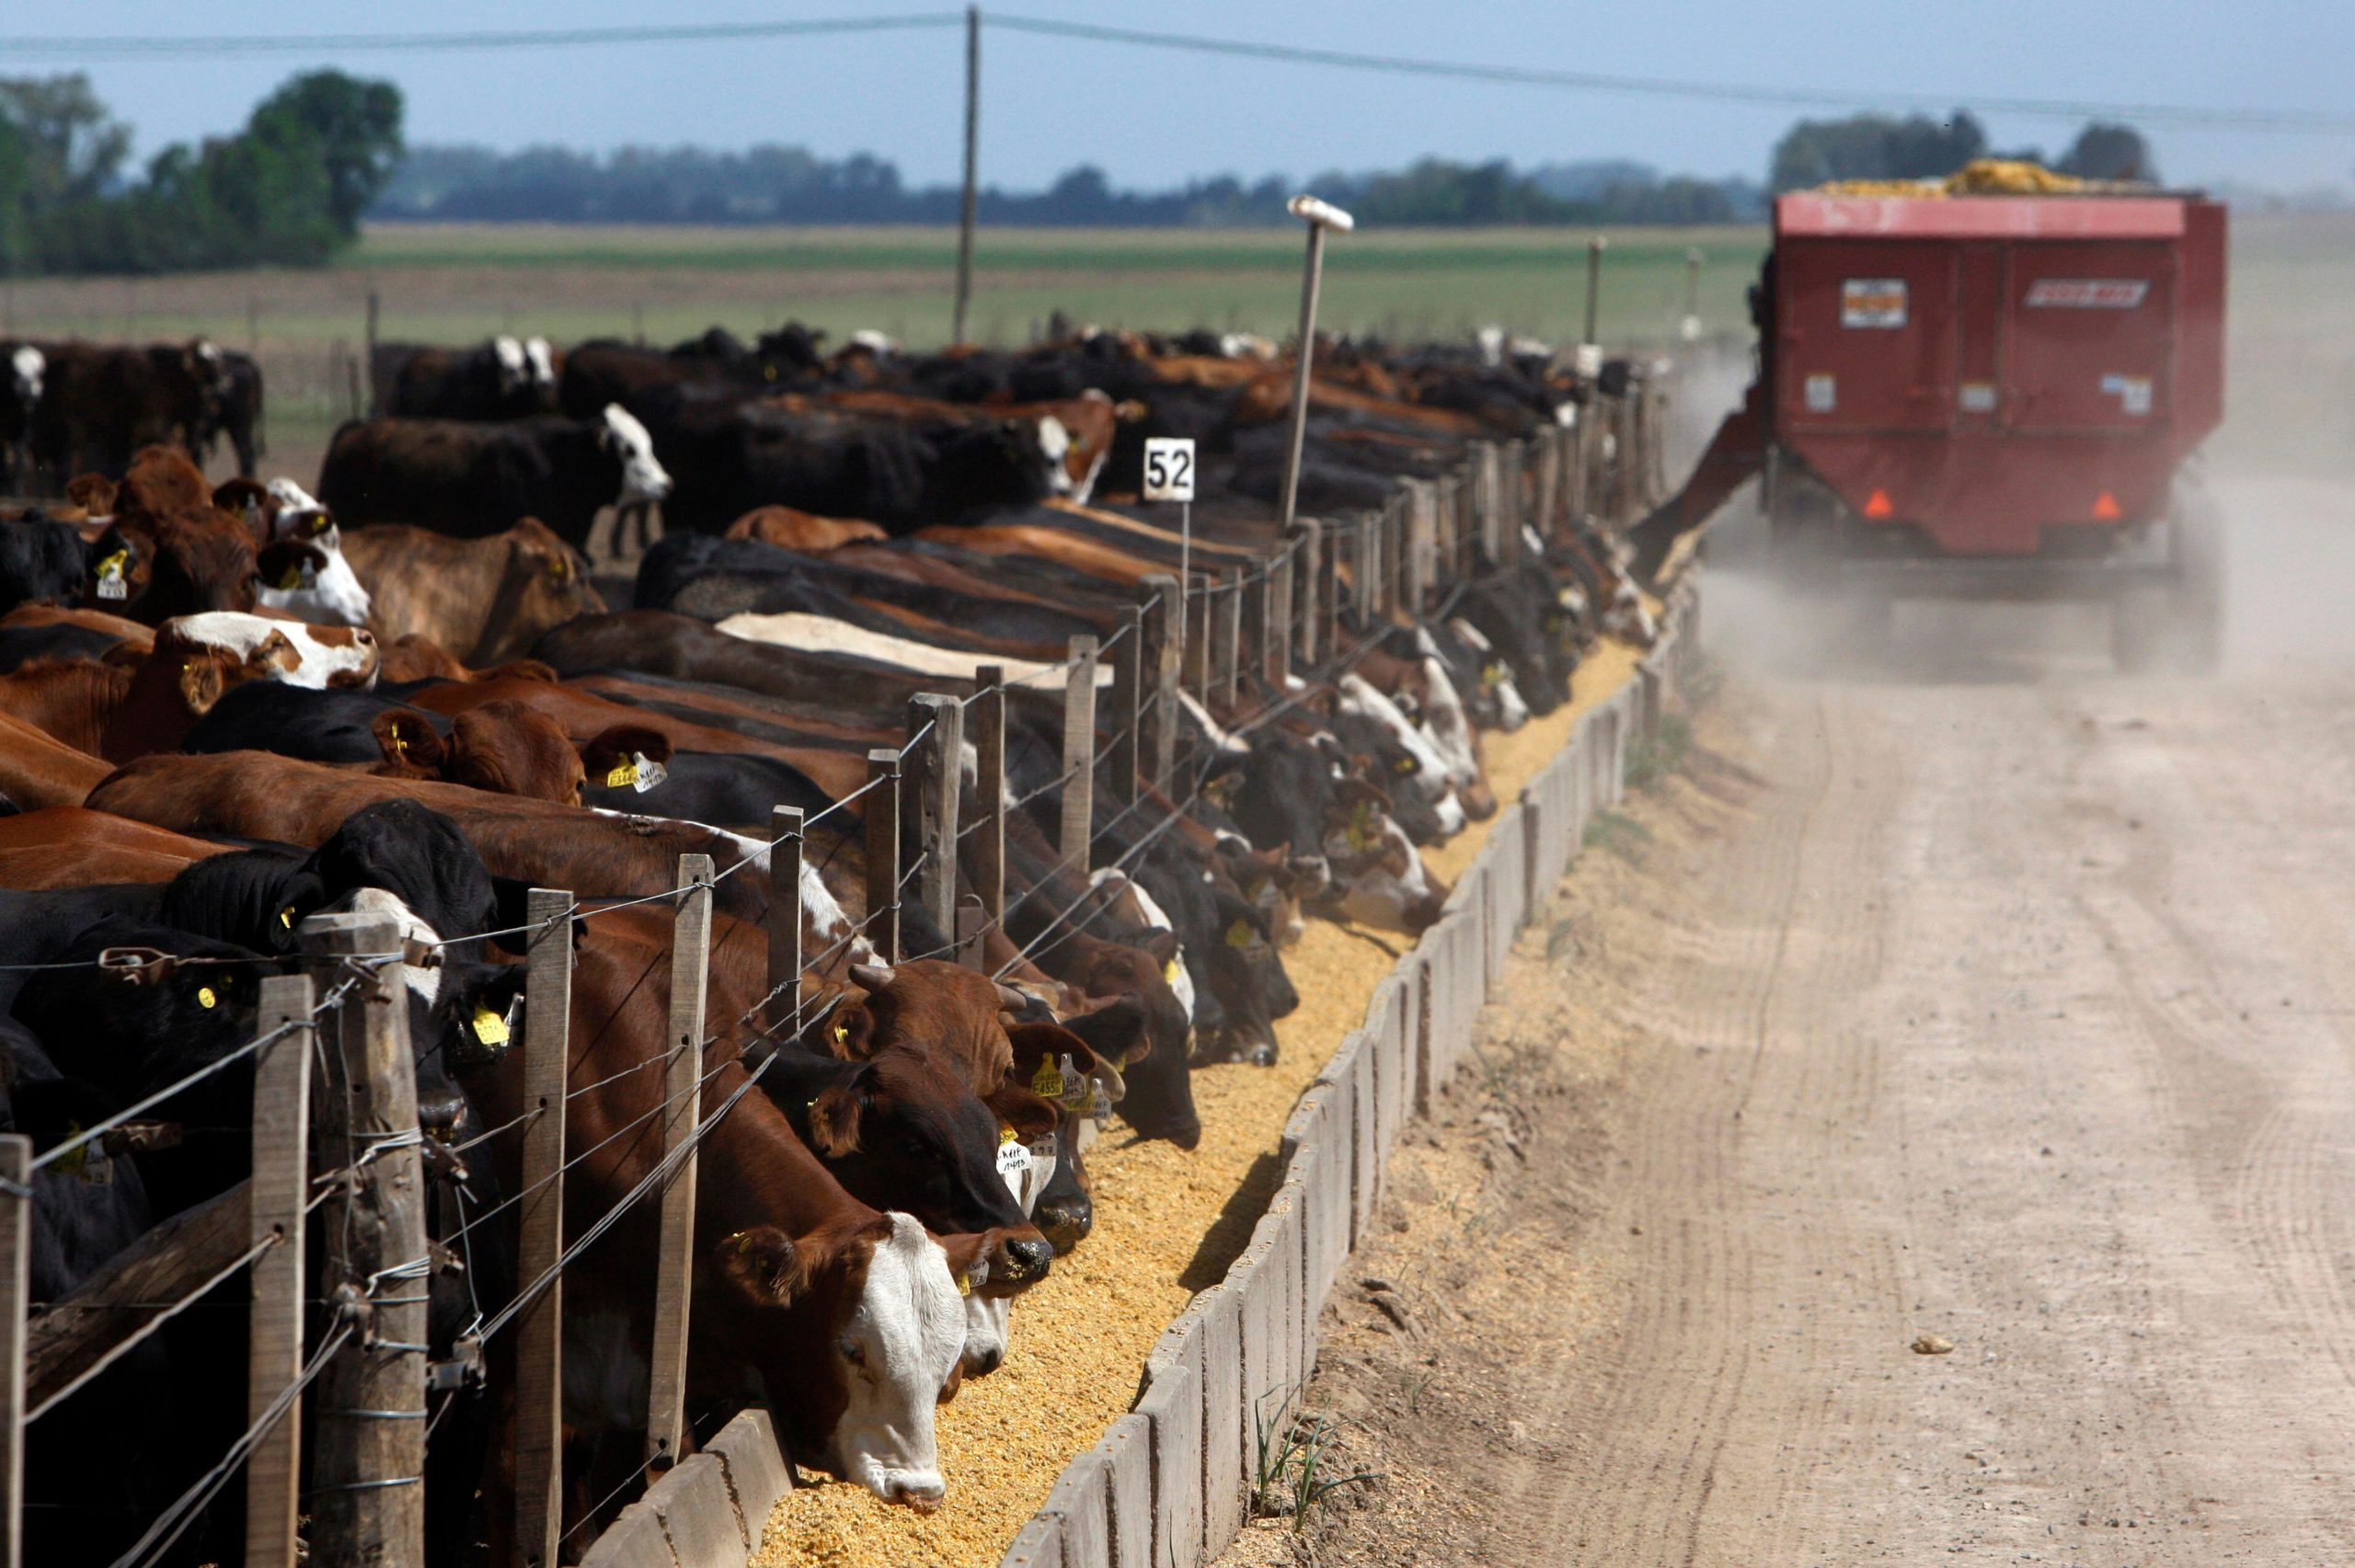 Beef cattle at an industrial-scale feedlot in Argentina. Despite growing recognition of their environmental impact, the production and consumption of meat and dairy remain delicate issues in public and high-level discussions.